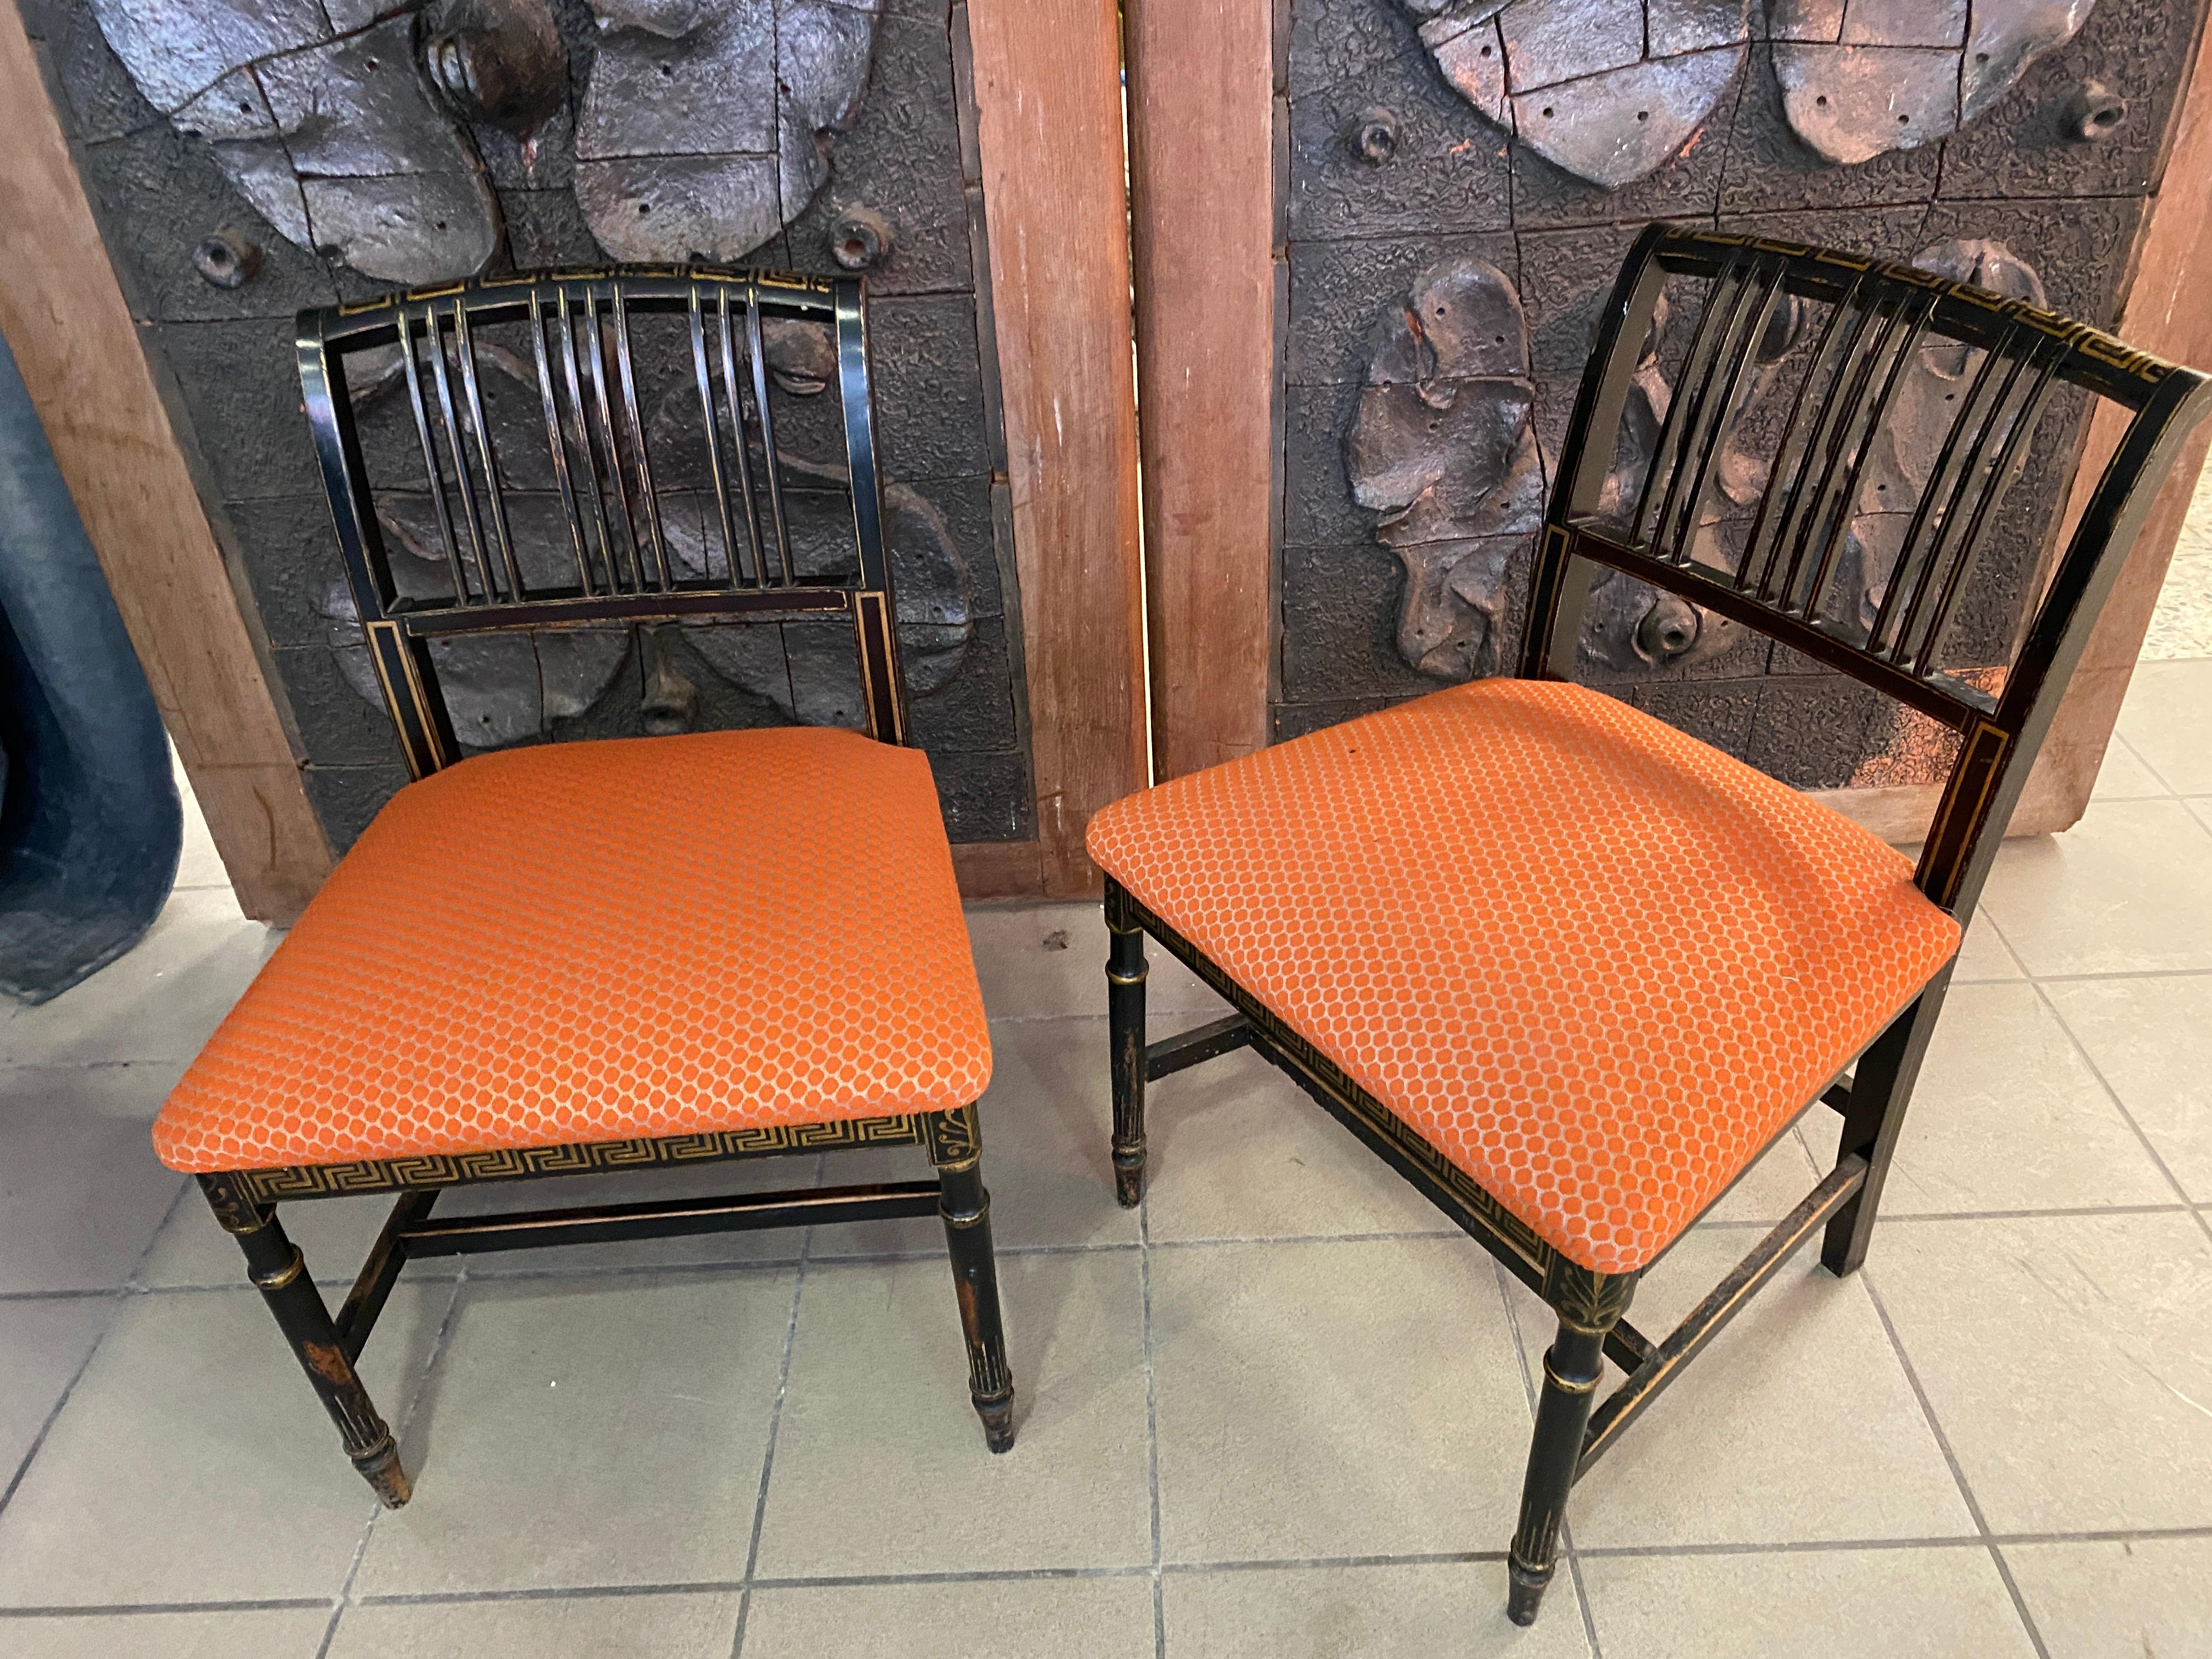 2 original Napoleon III ebonised chairs, France, 1850s
wear and lack of gilding.